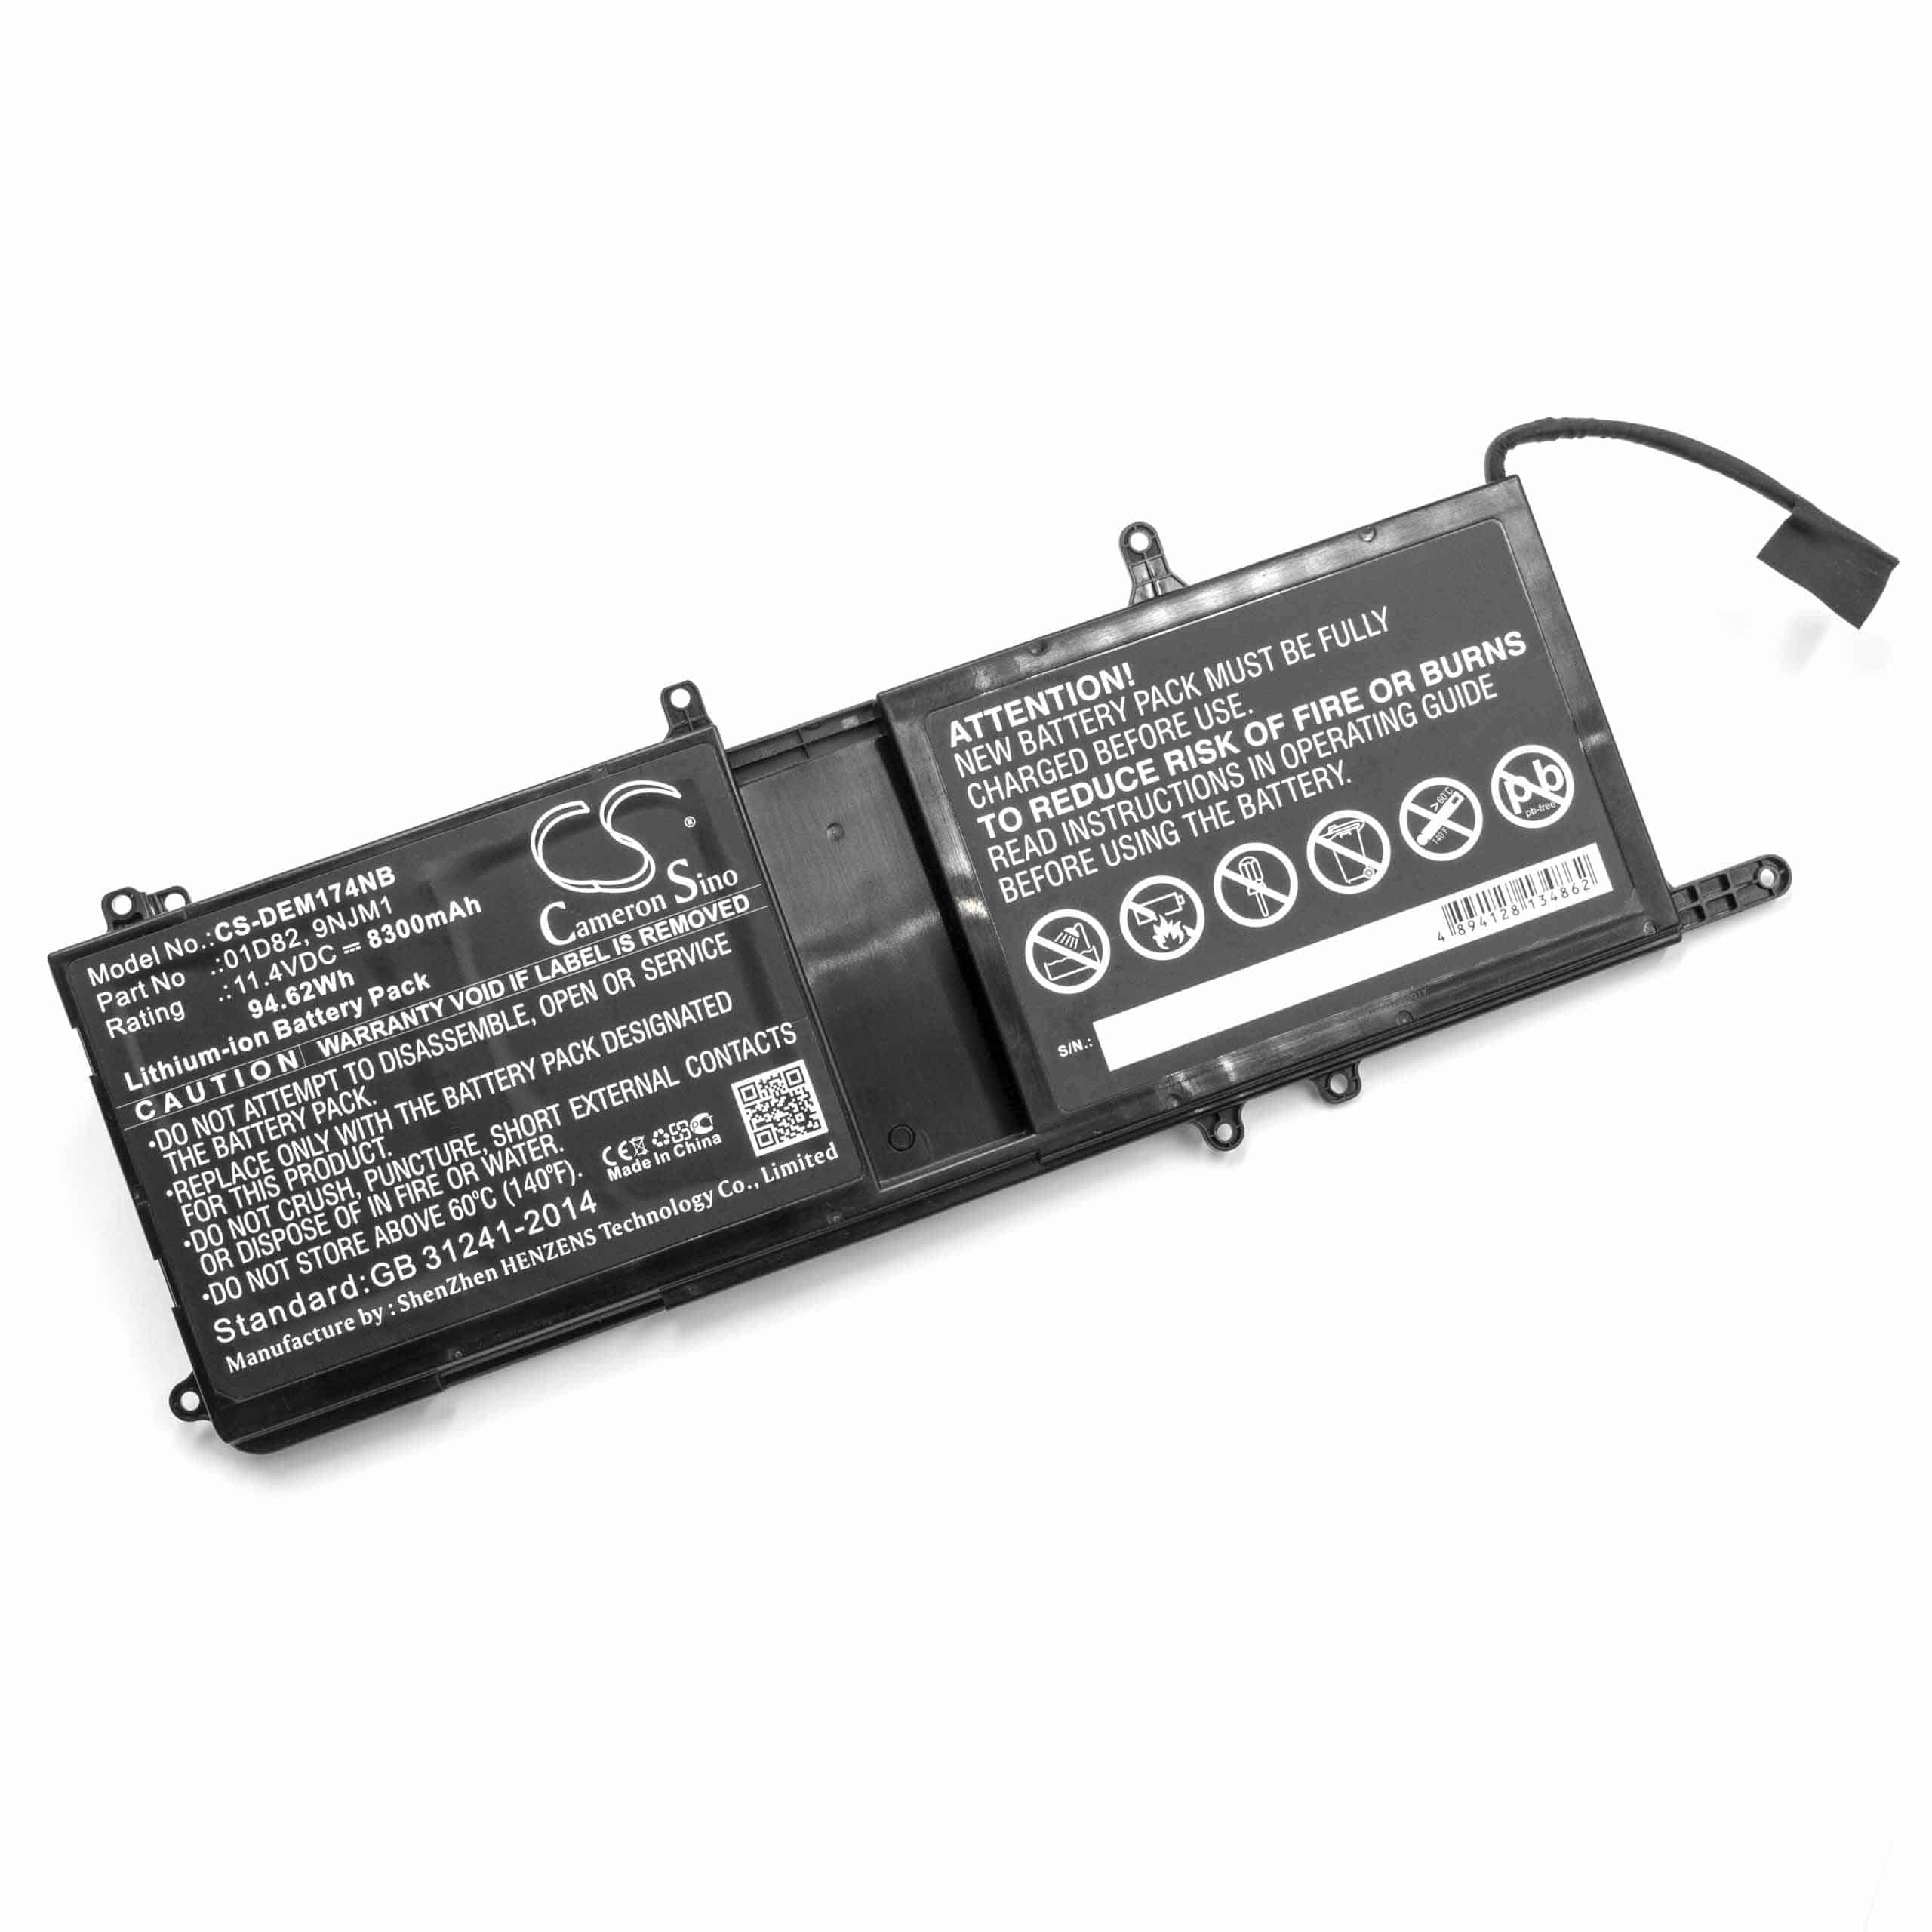 Notebook Battery Replacement for Dell 0HF250, 0MG2YH, 01D82, 9NJM1, HF250, MG2YH - 8300mAh 11.4V Li-Ion